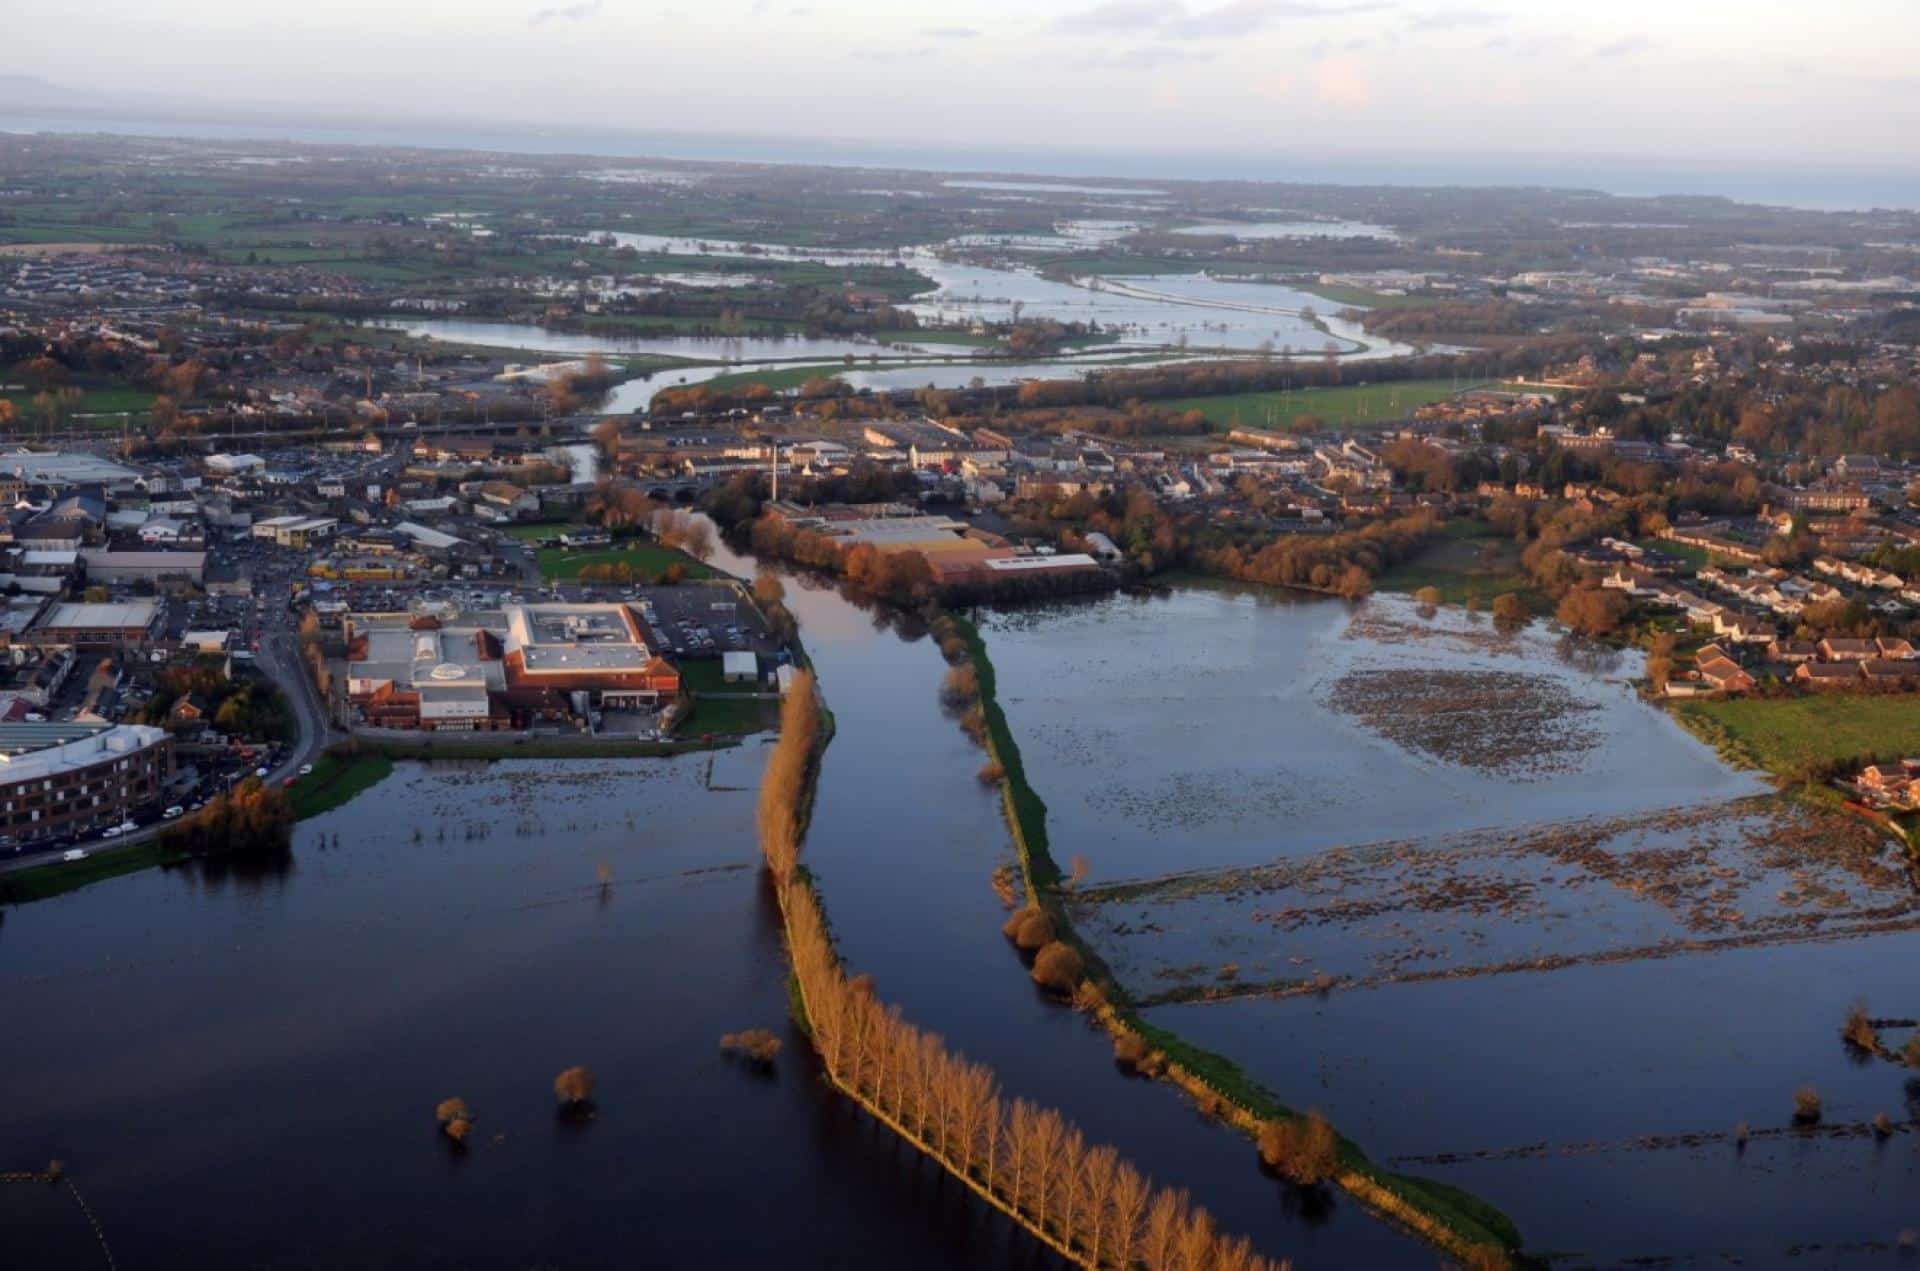 Aerial photo of flooding in Portadown, November 2009